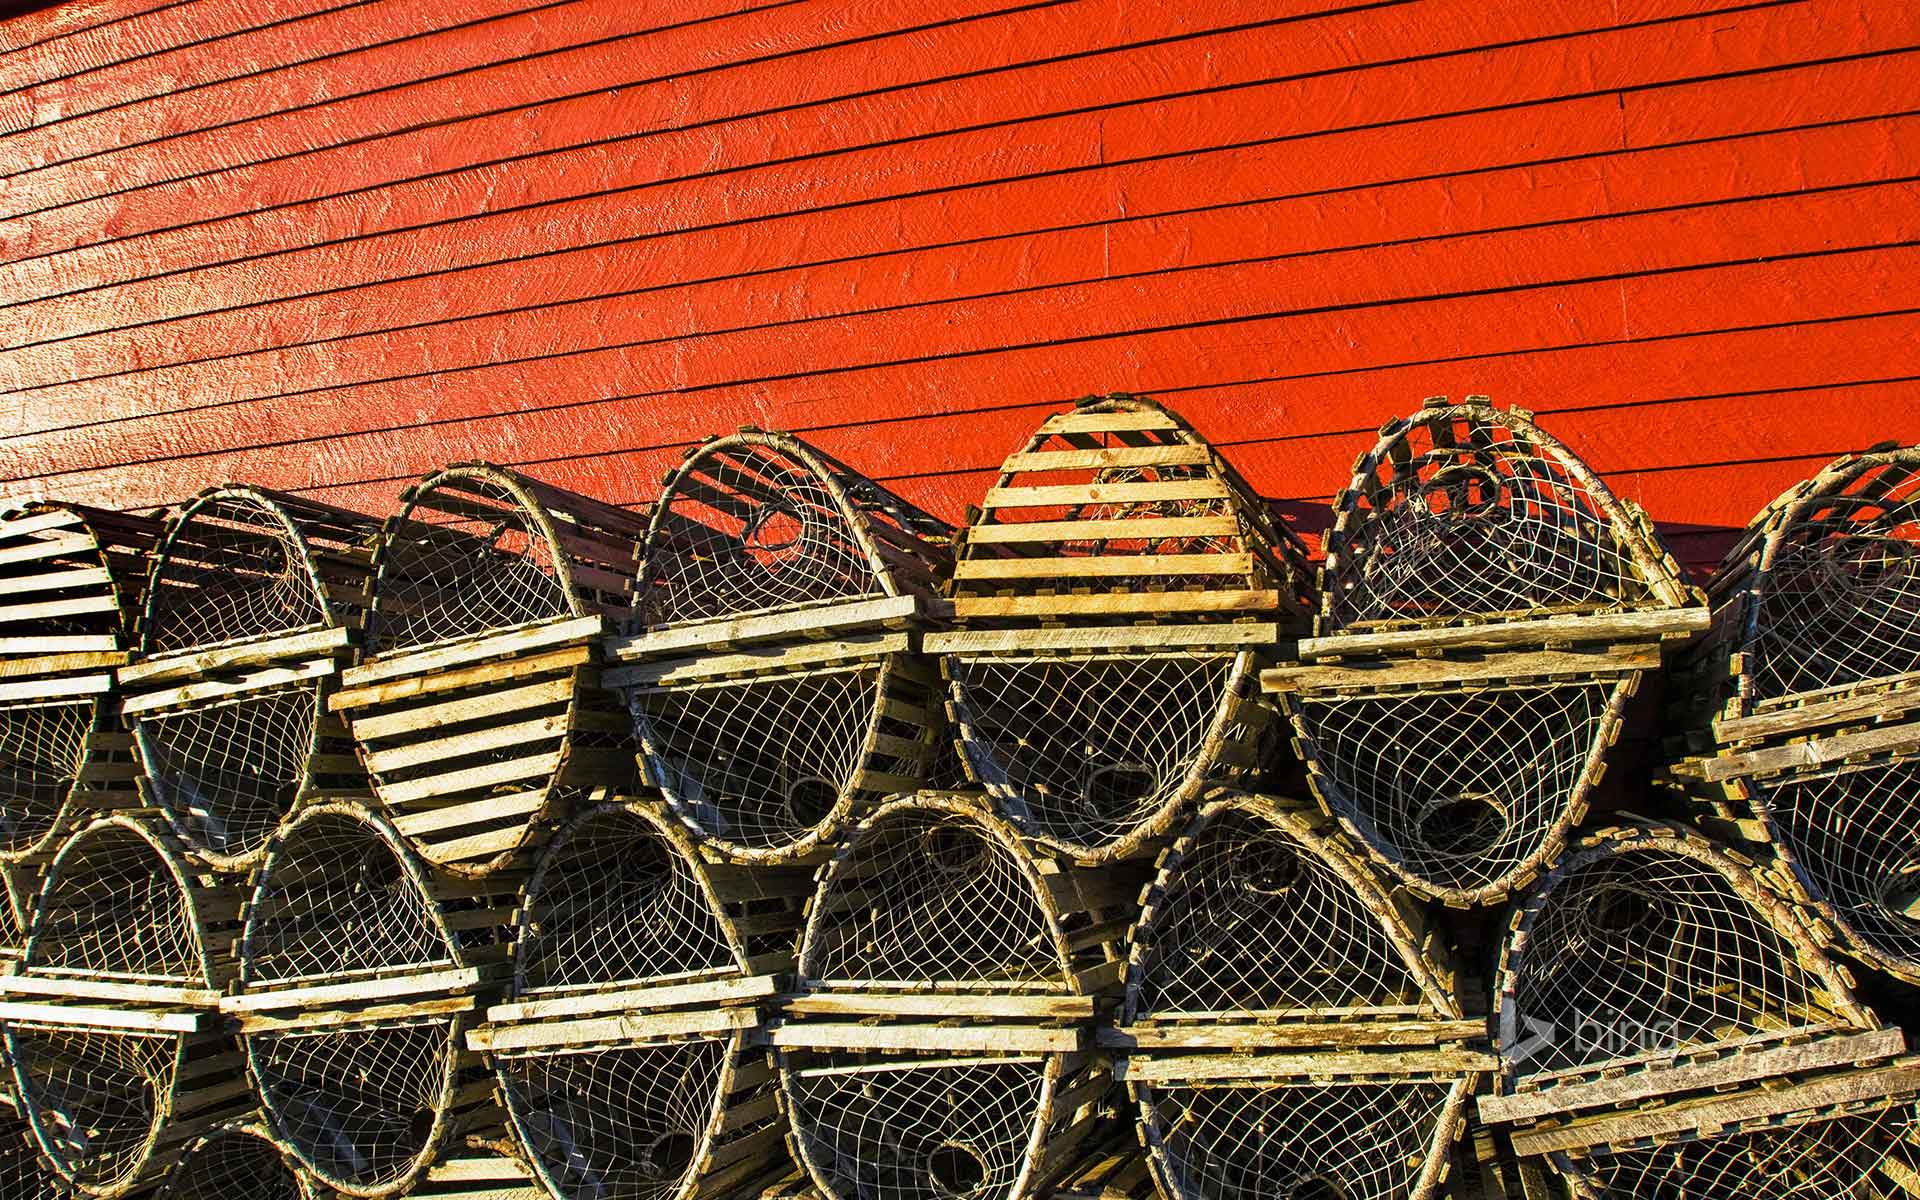 Lobster traps stacked against a red fishing shed in Newfoundland, Canada